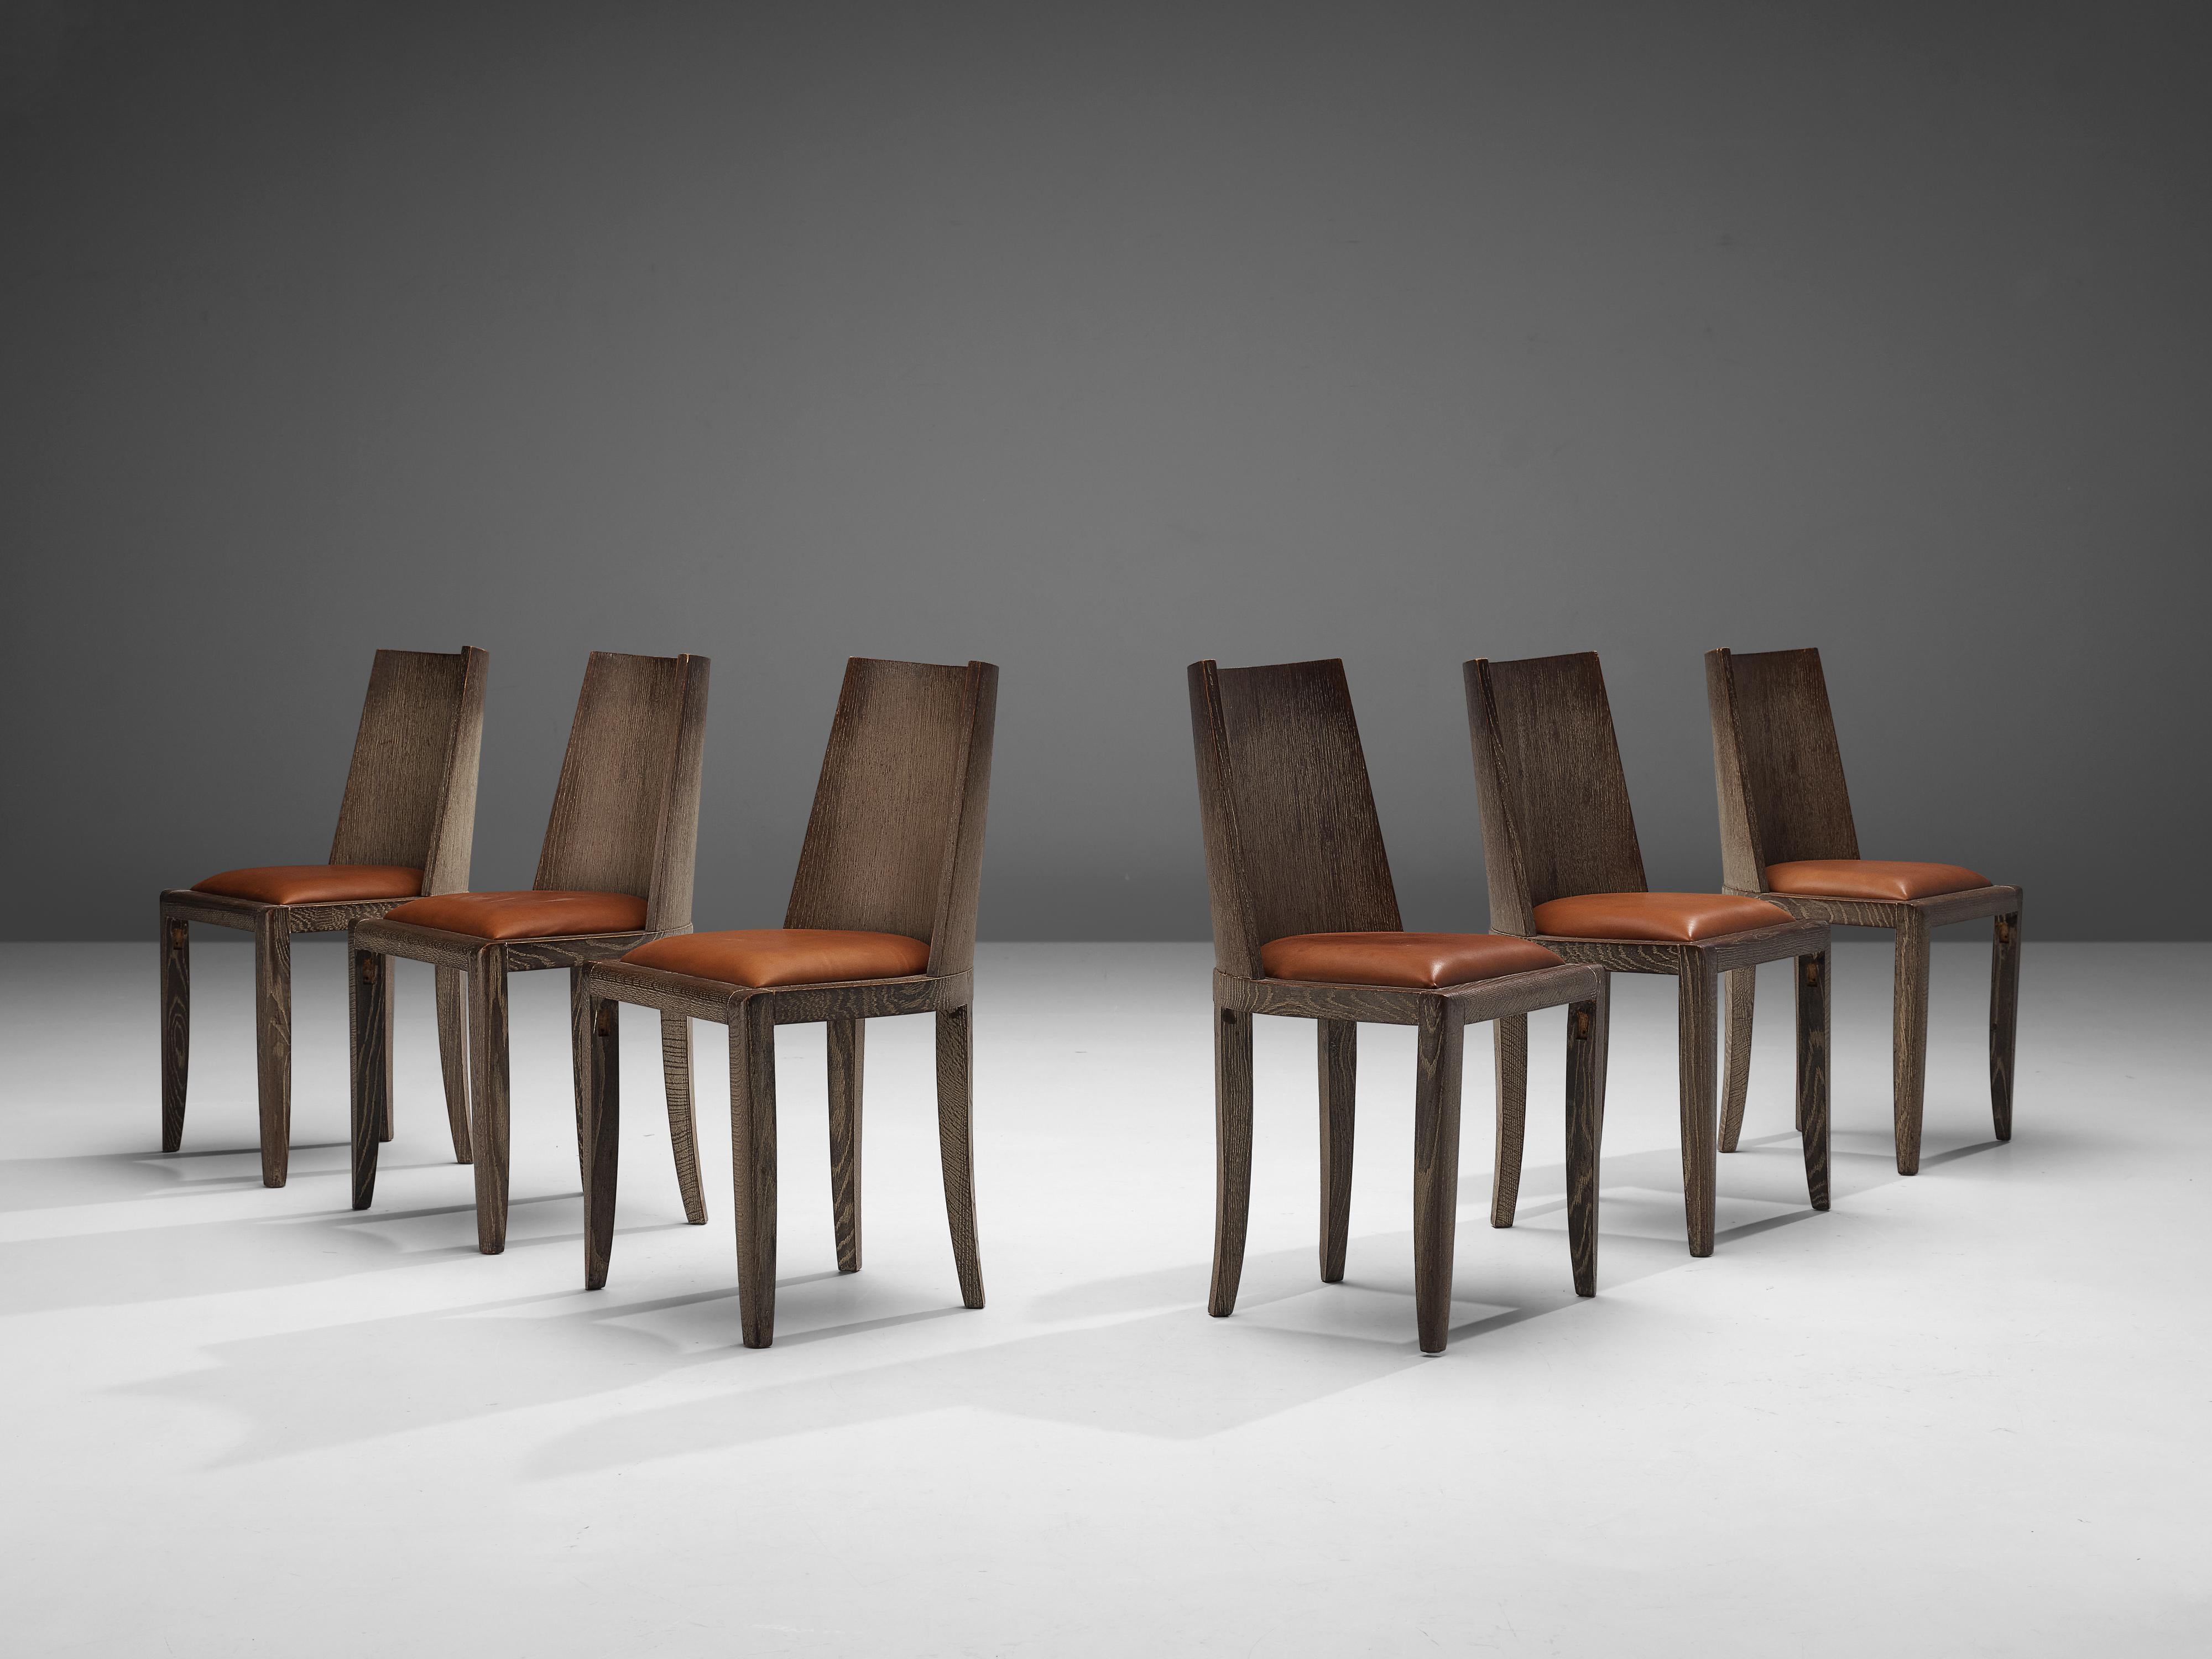 Set of six dining chairs, oak and leather, Belgium, 1930s 

These subtle and modest chairs feature cerused oak which gives these items an authentic and natural allure. This term refers to a unique finishing technique that showcases the beautiful